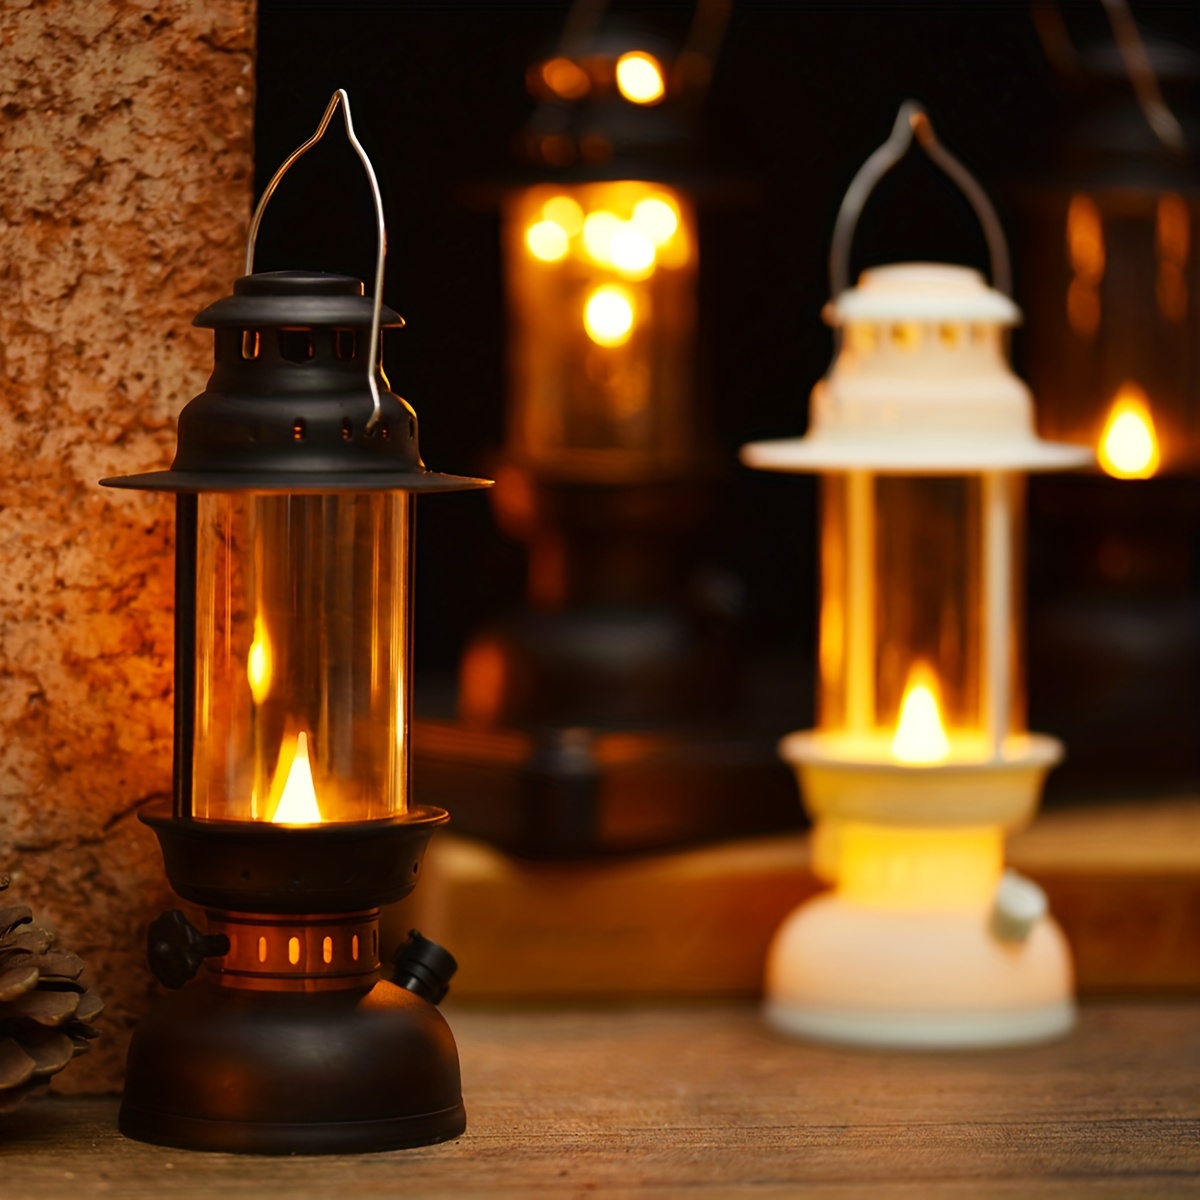 1pc Vintage Style Mini Led Candle Lamp Night Light For Camping, Bedside,  Indoors, Decorative Lantern For Christmas, Party, Yard Decorating